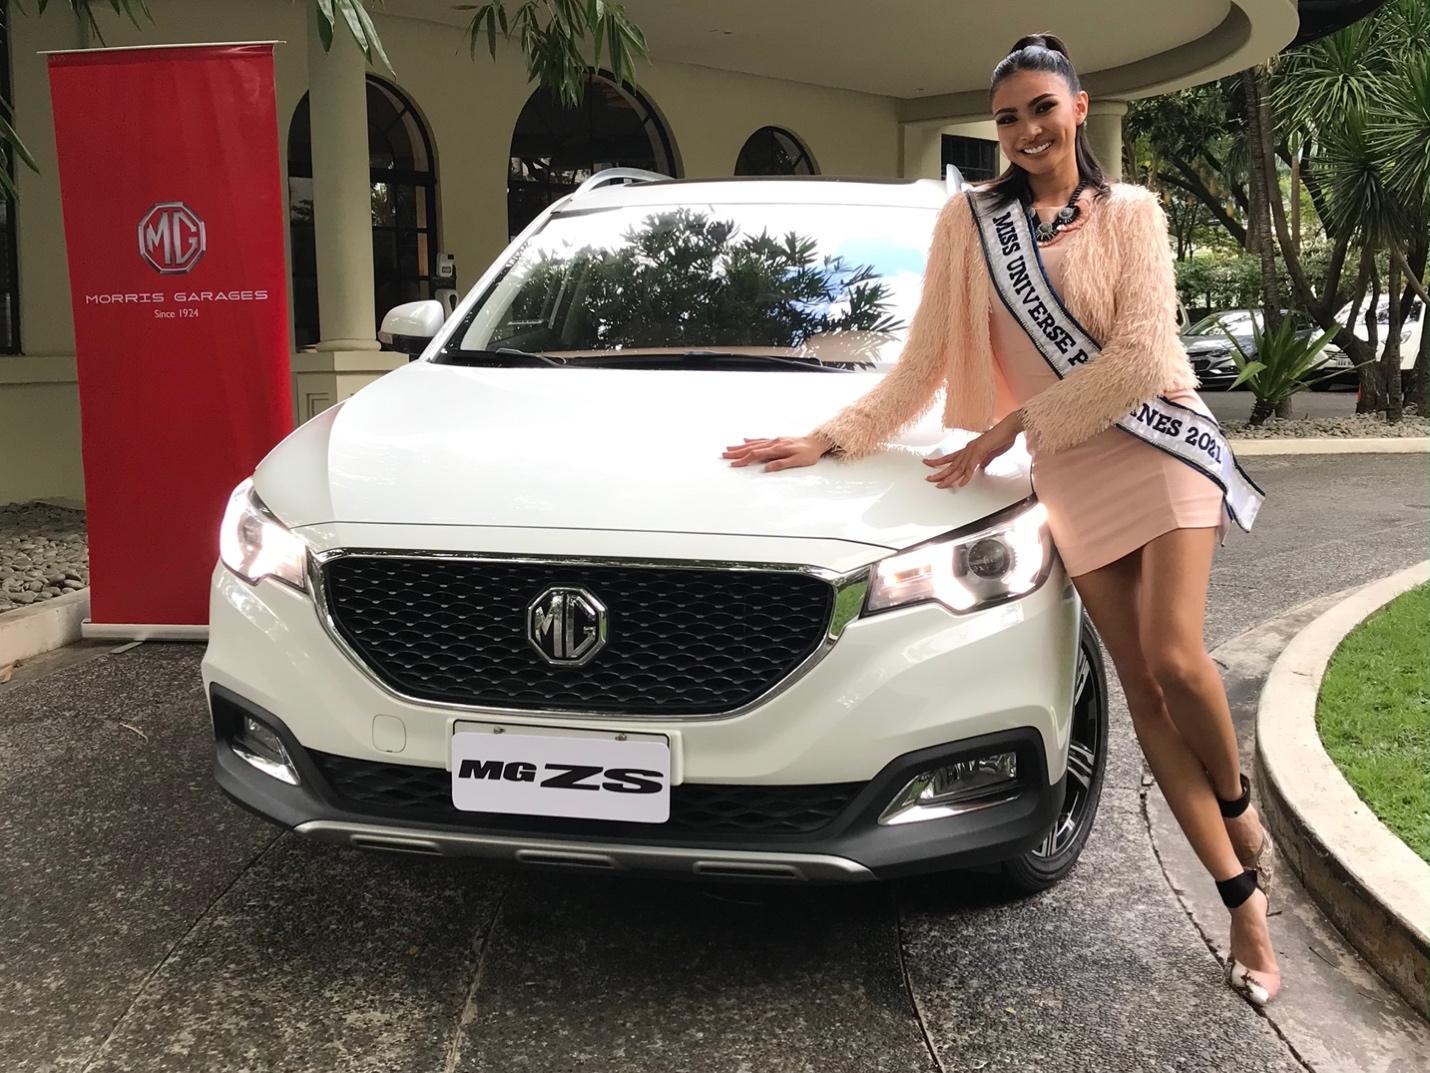 MISS UNIVERSE PH 2021 IS NOW A PROUD MG OWNER